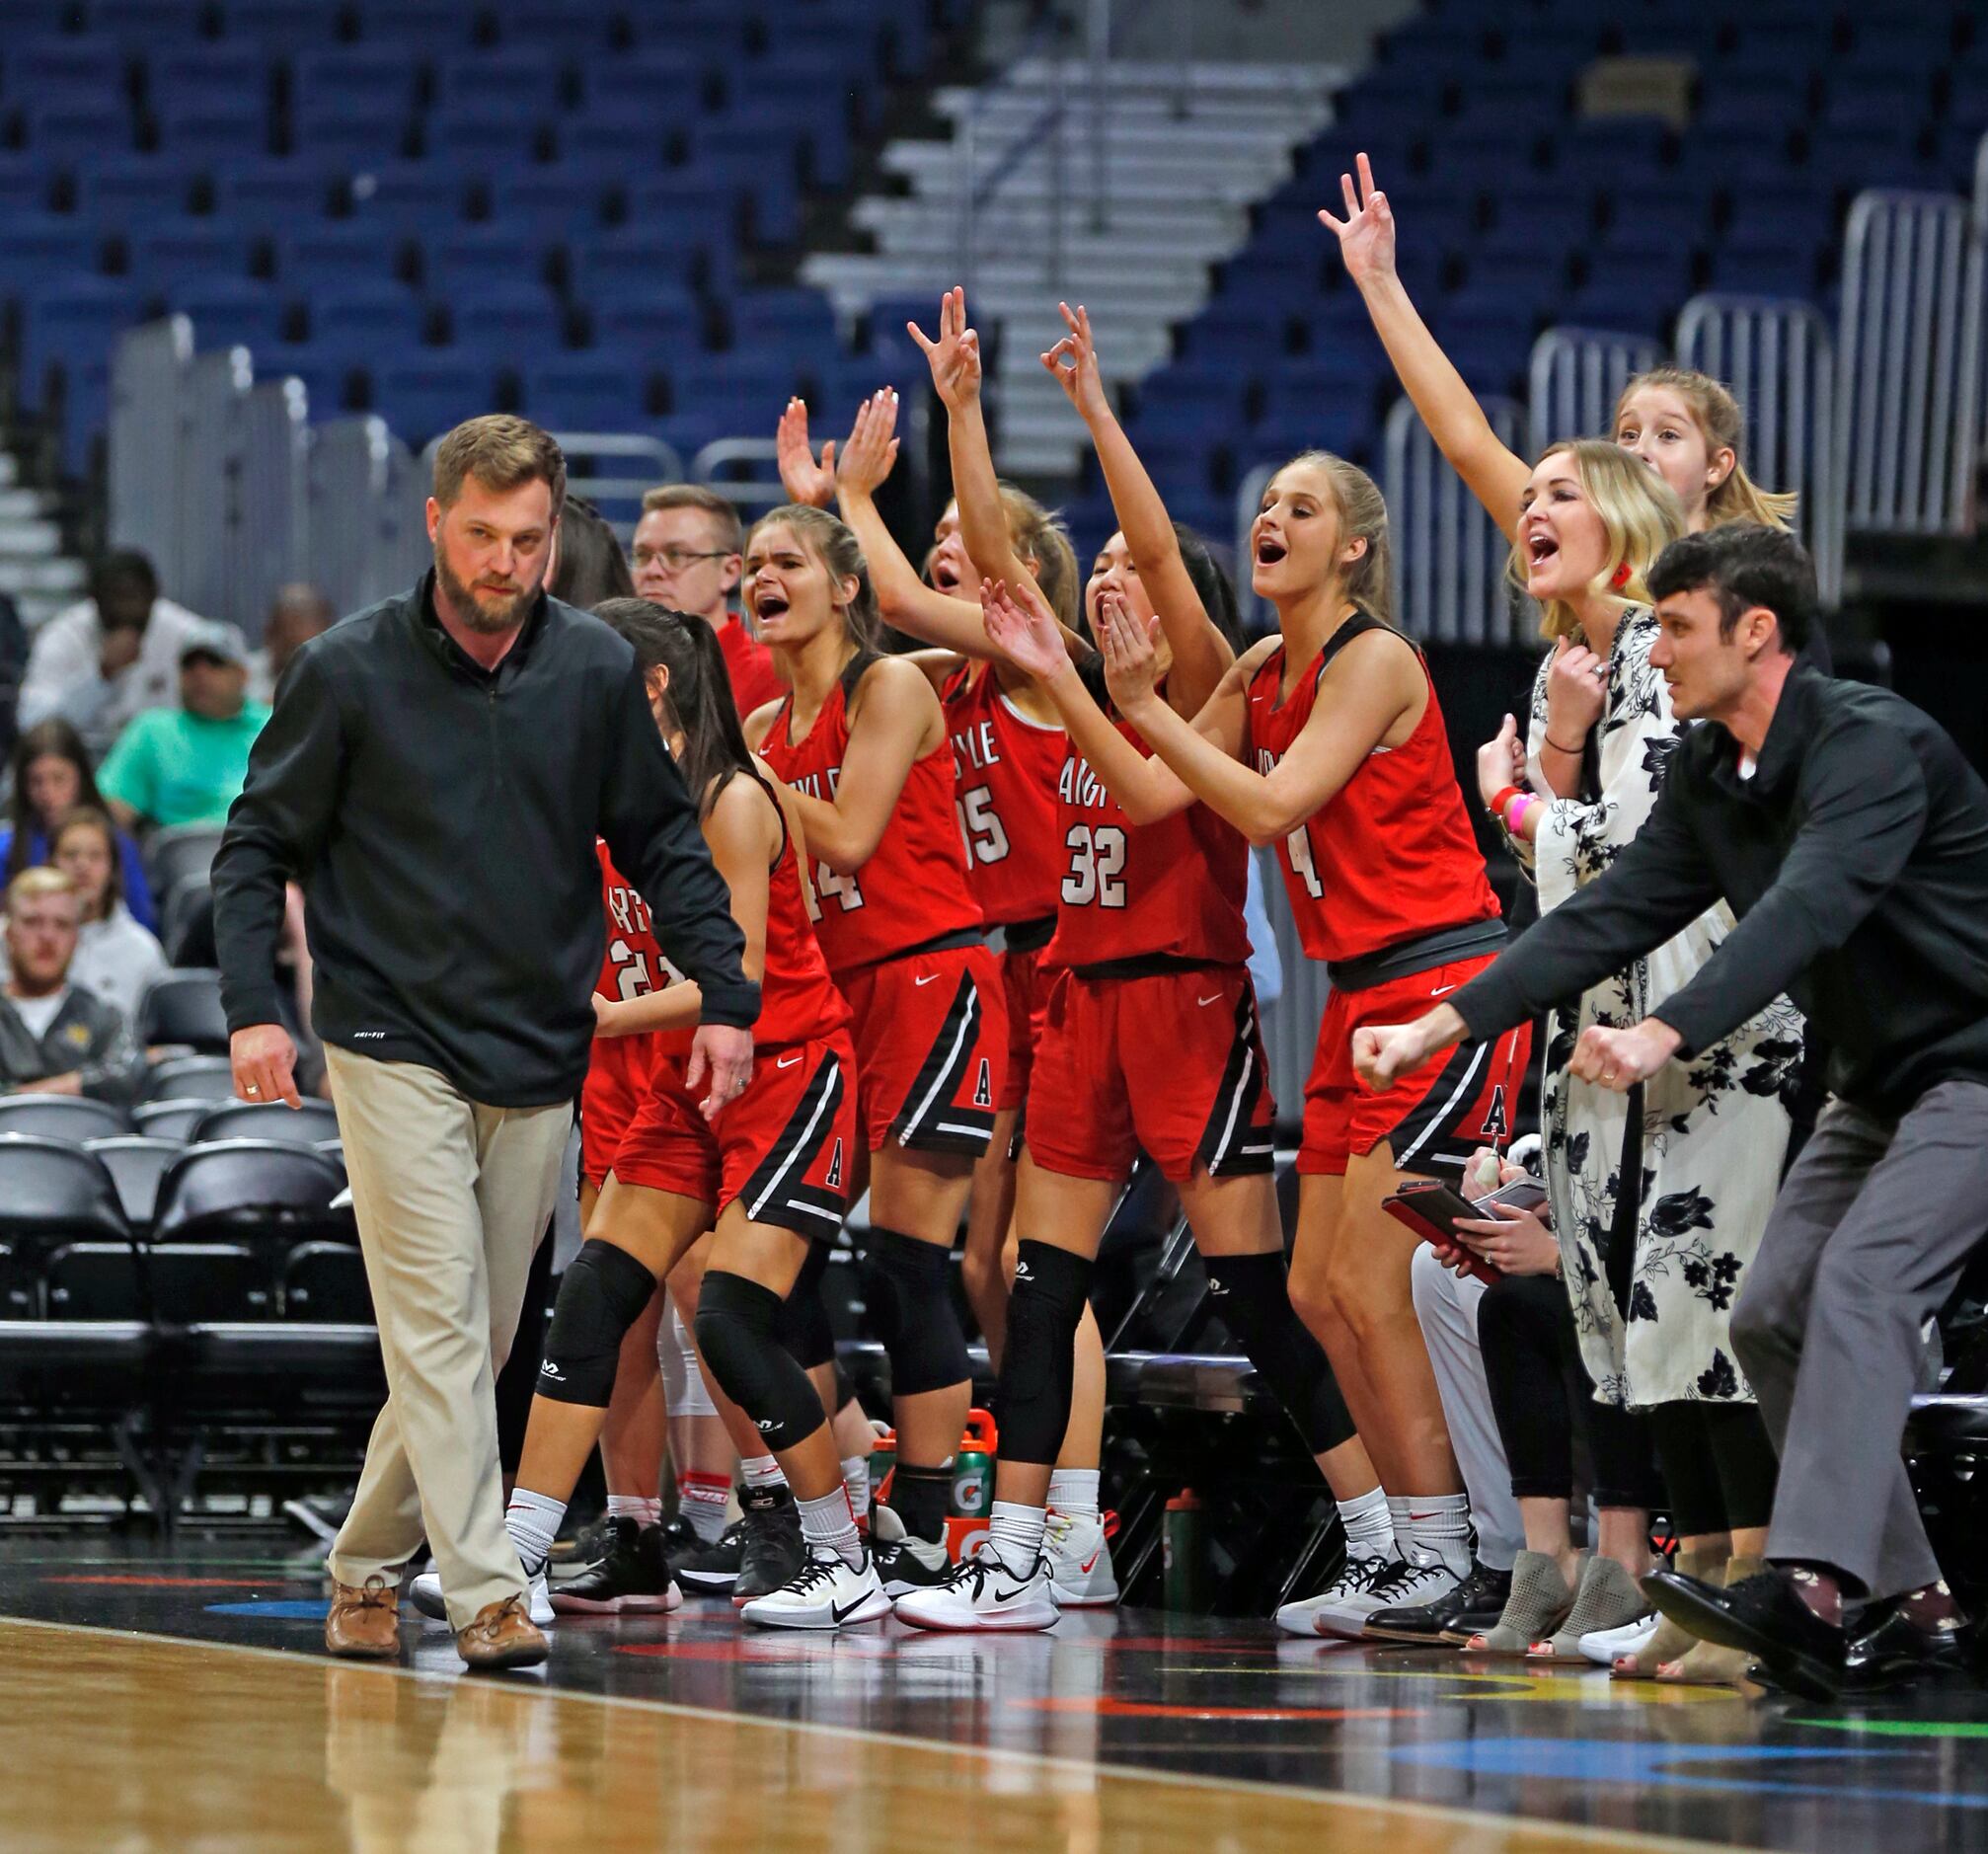 Argyle bench celebrates after a three in a 4A final on Saturday, March 7, 2020 at the...